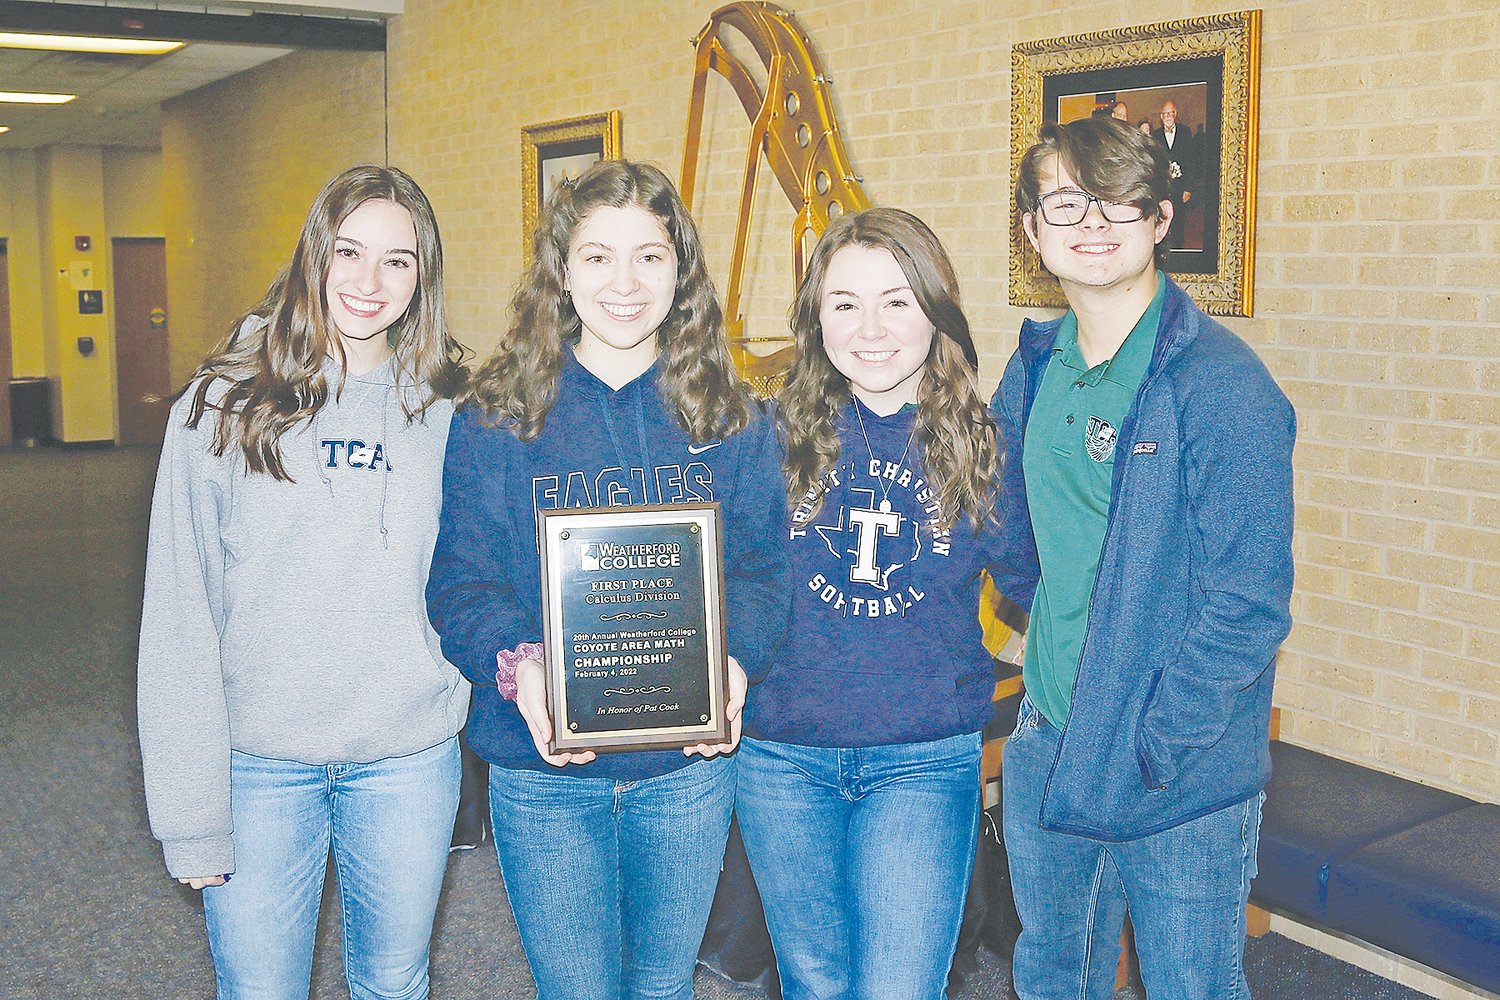 Trinity Christian Academy students Katherine White, Charlotte Floyd, Paige Bull, and Steven Lipsky placed first in calculus as a team at the Coyote Math Championships at Weatherford College. White and Floyd placed first and second respectively as individuals.